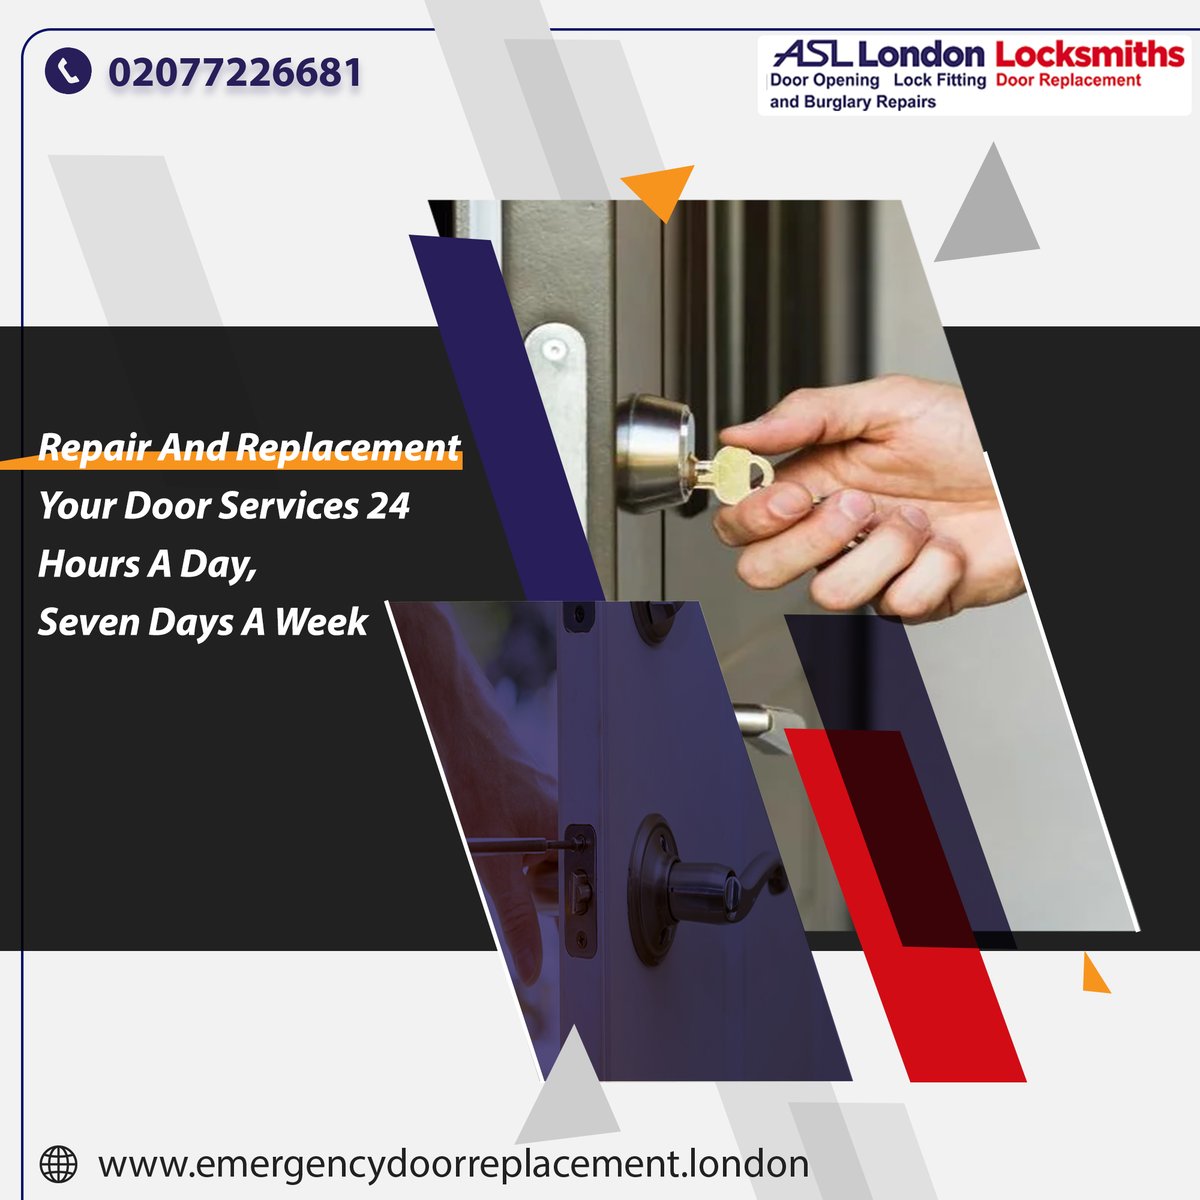 Repair And Replacement Your Door Services 24 Hours A Day, Seven Days A Week
bit.ly/2RDuN6E
#emergencydoorrepair 
#emergencydoorreplacementlondon